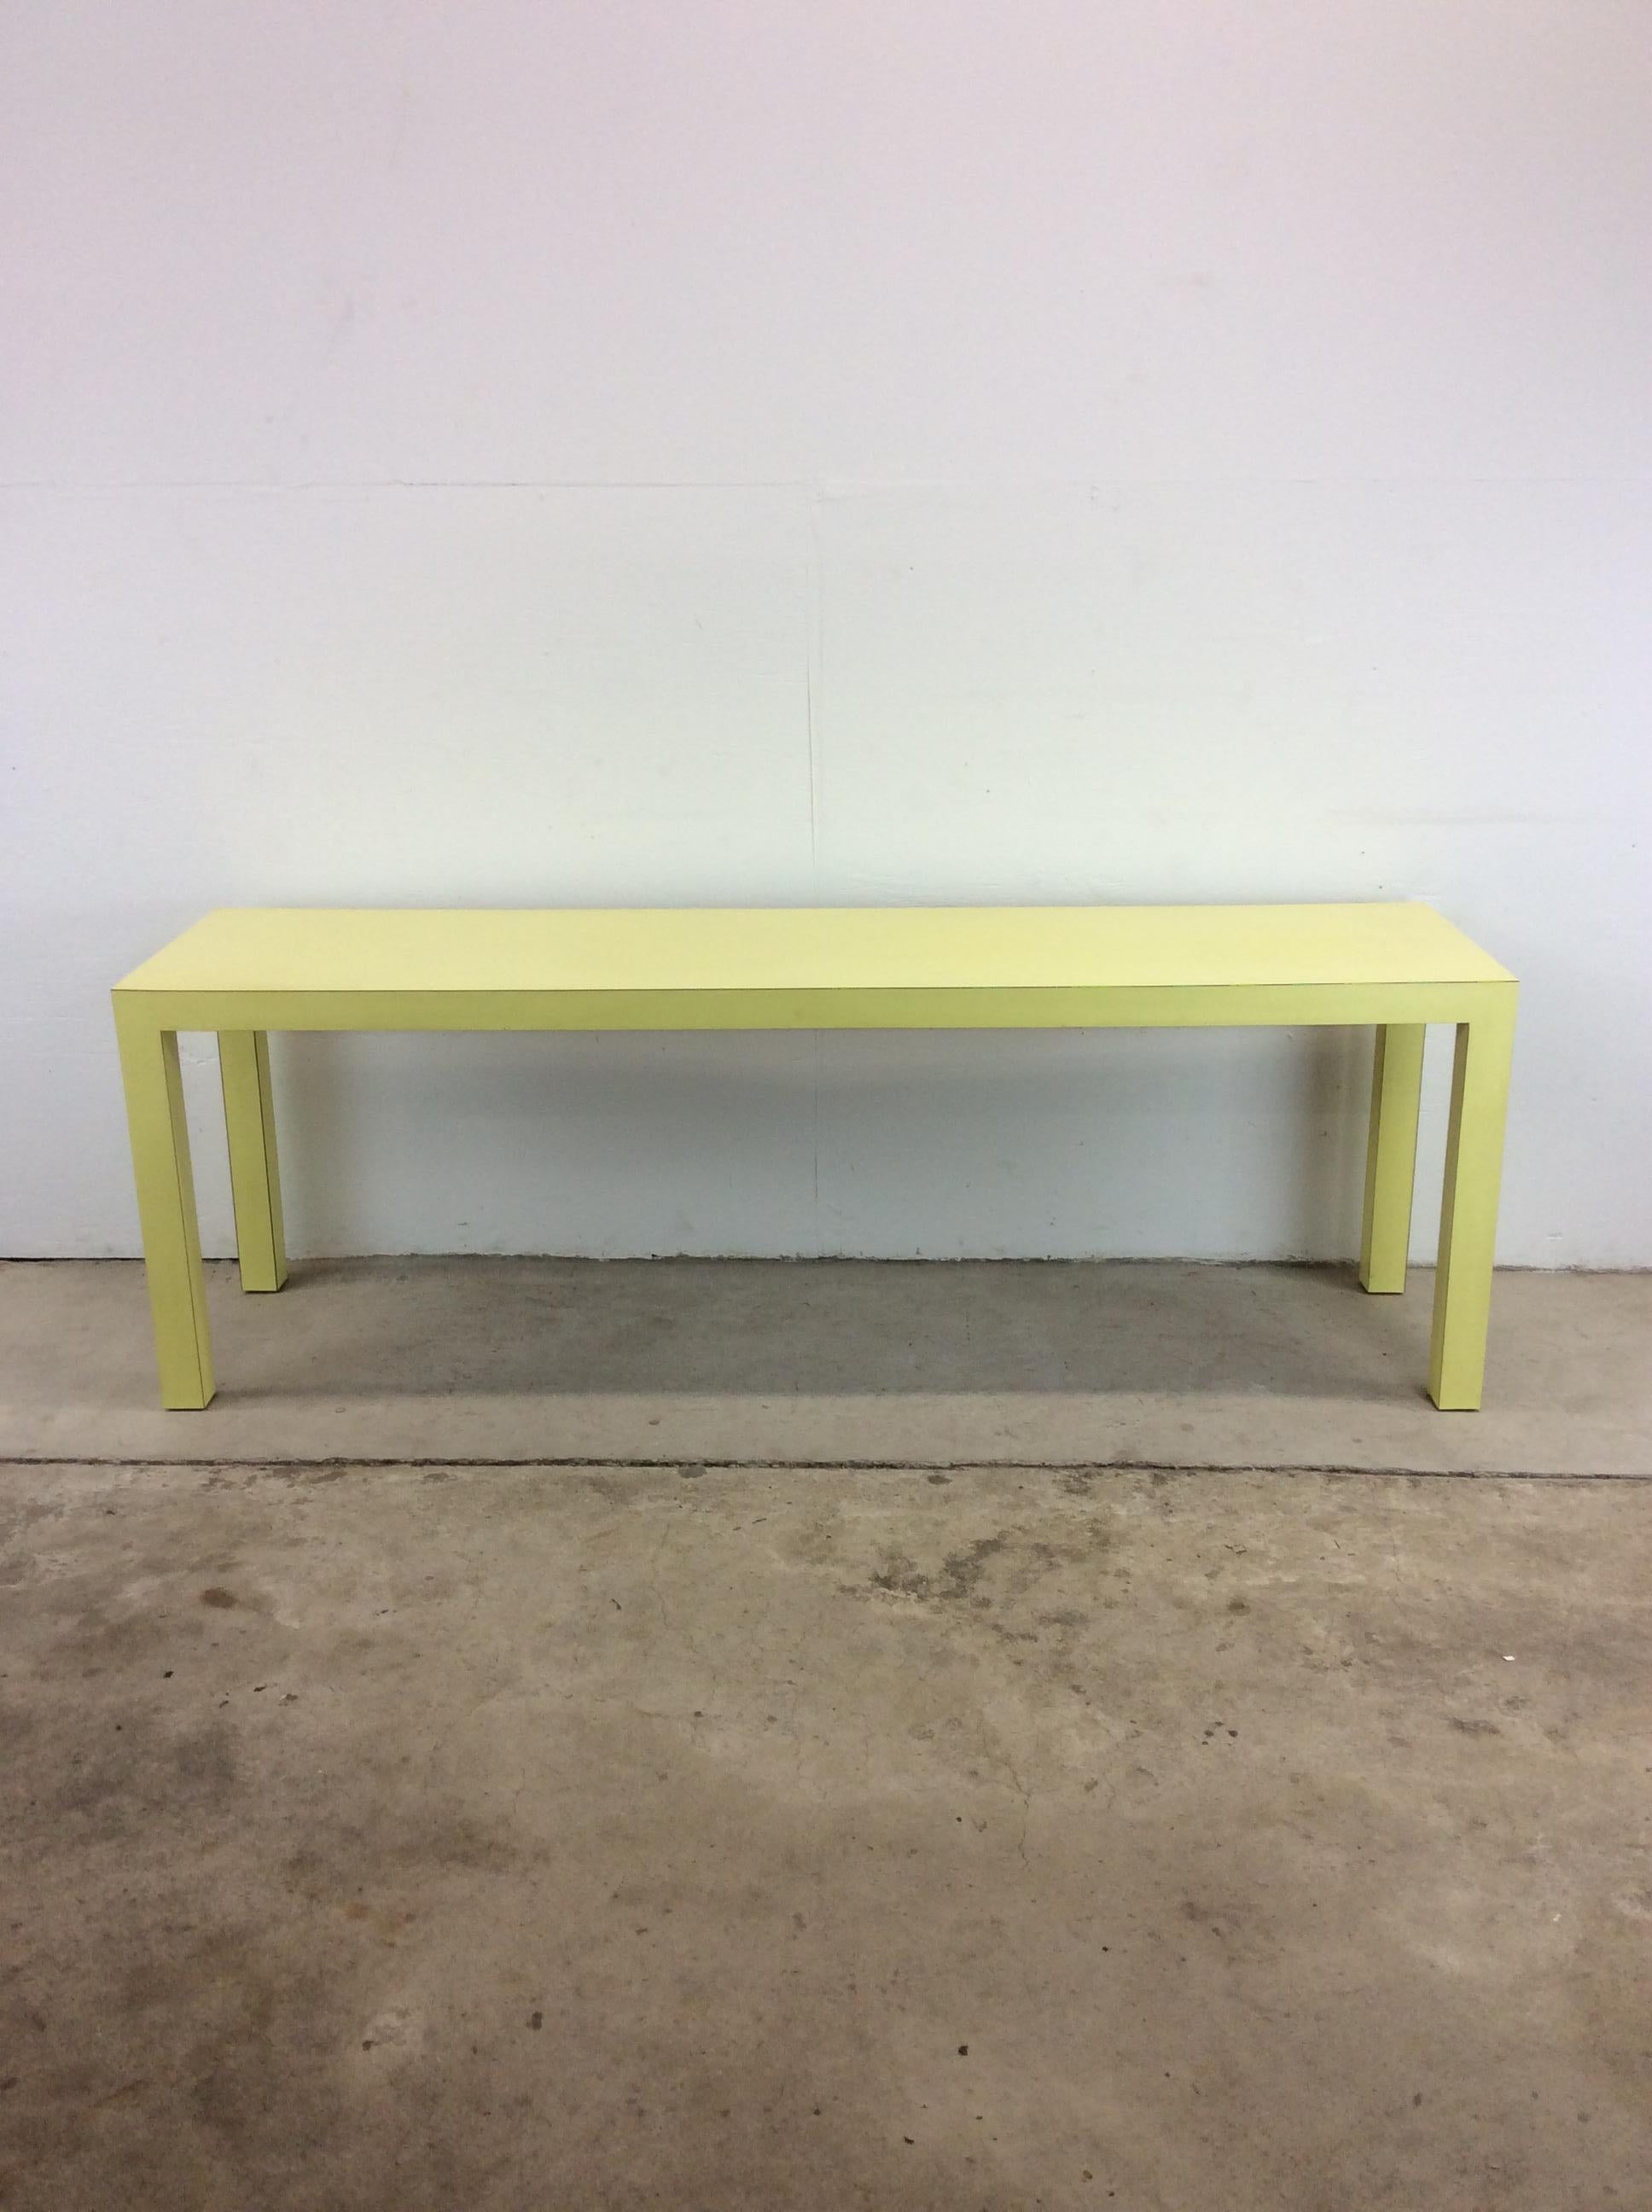 This vintage post modern sofa / console table features pressed wood construction, unique key-lime green lacquer finish, long smooth top, four squared legs, with lacquer finish throughout.

Complimentary pair of side green side chairs available